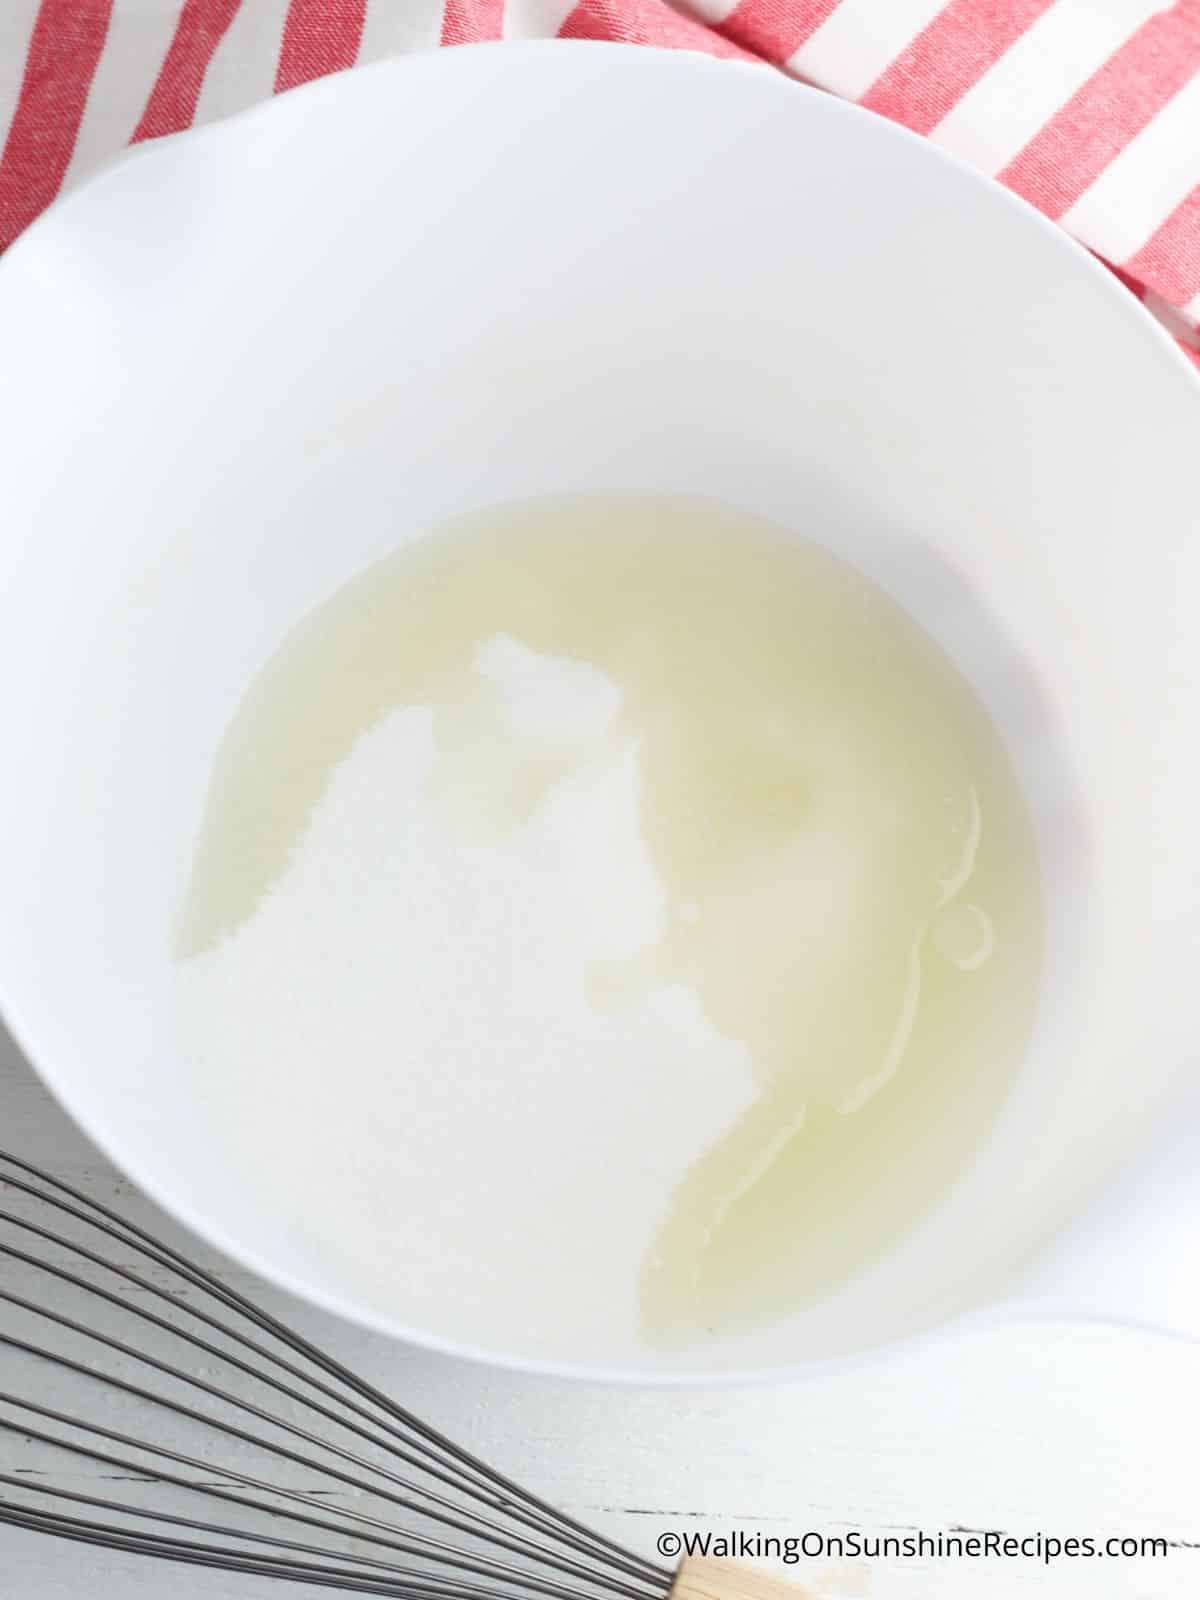 Cream sugar and oil together in bowl.